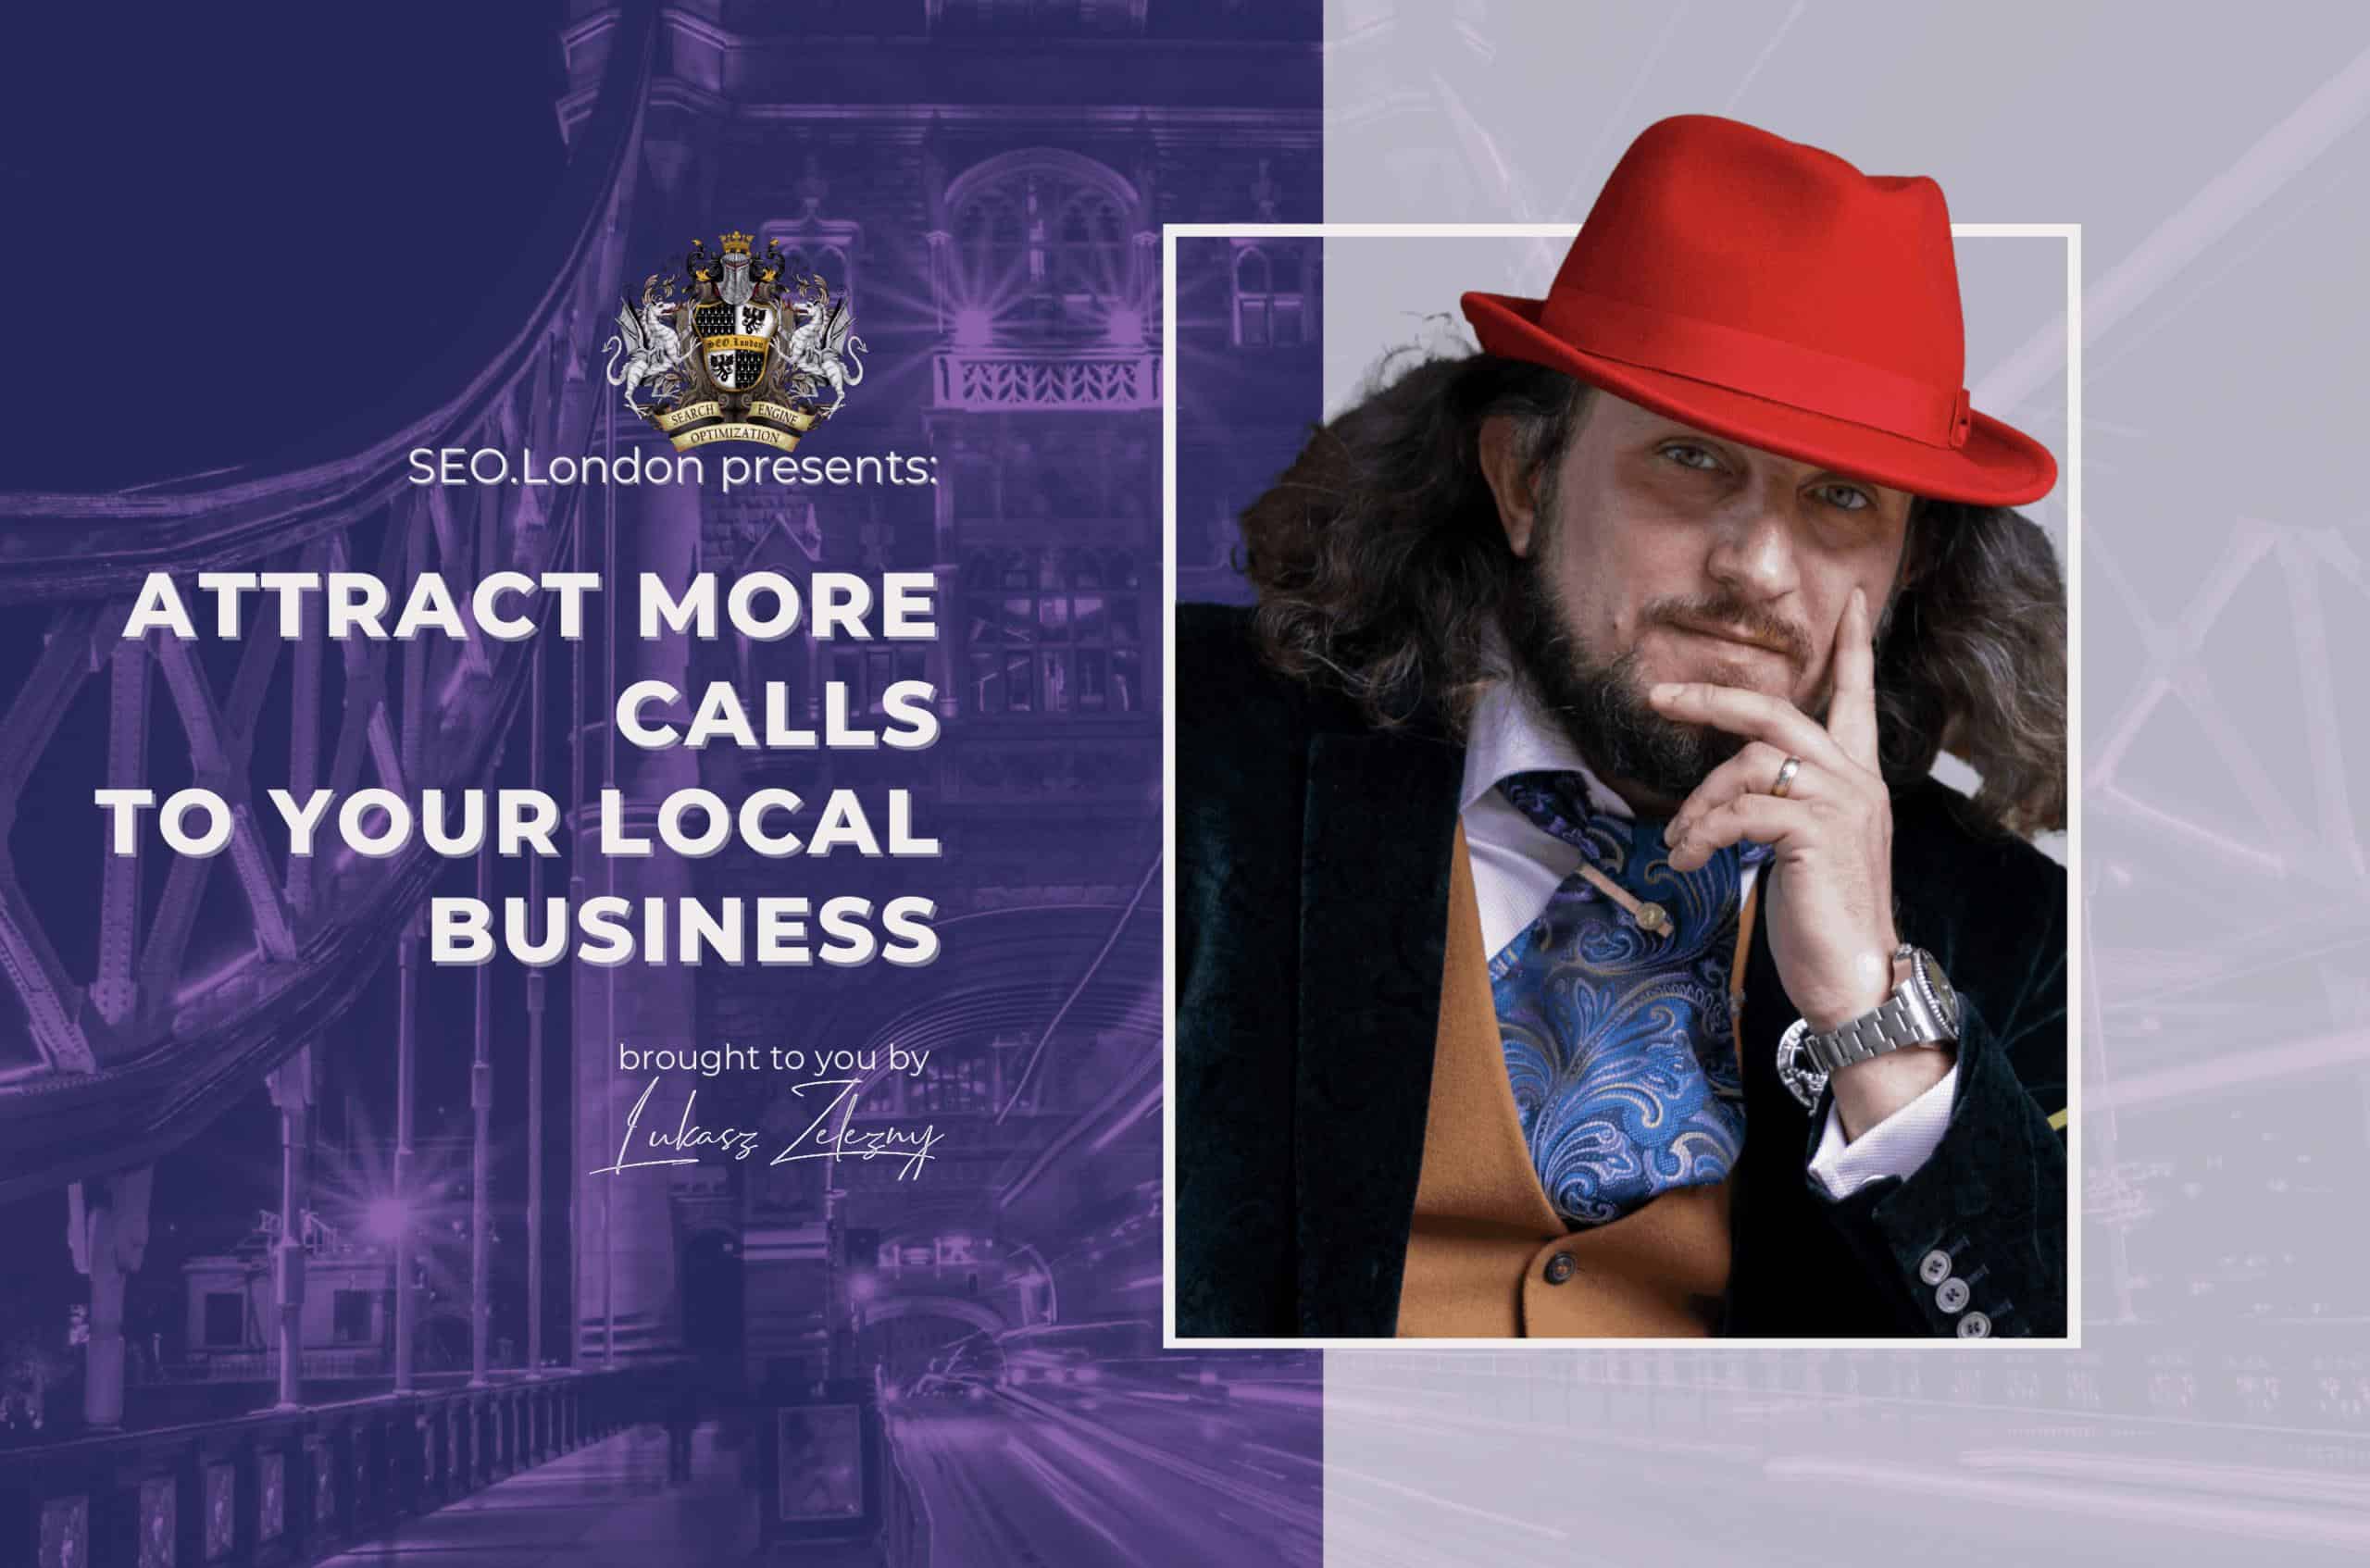 Attract More Calls to Your Local Business